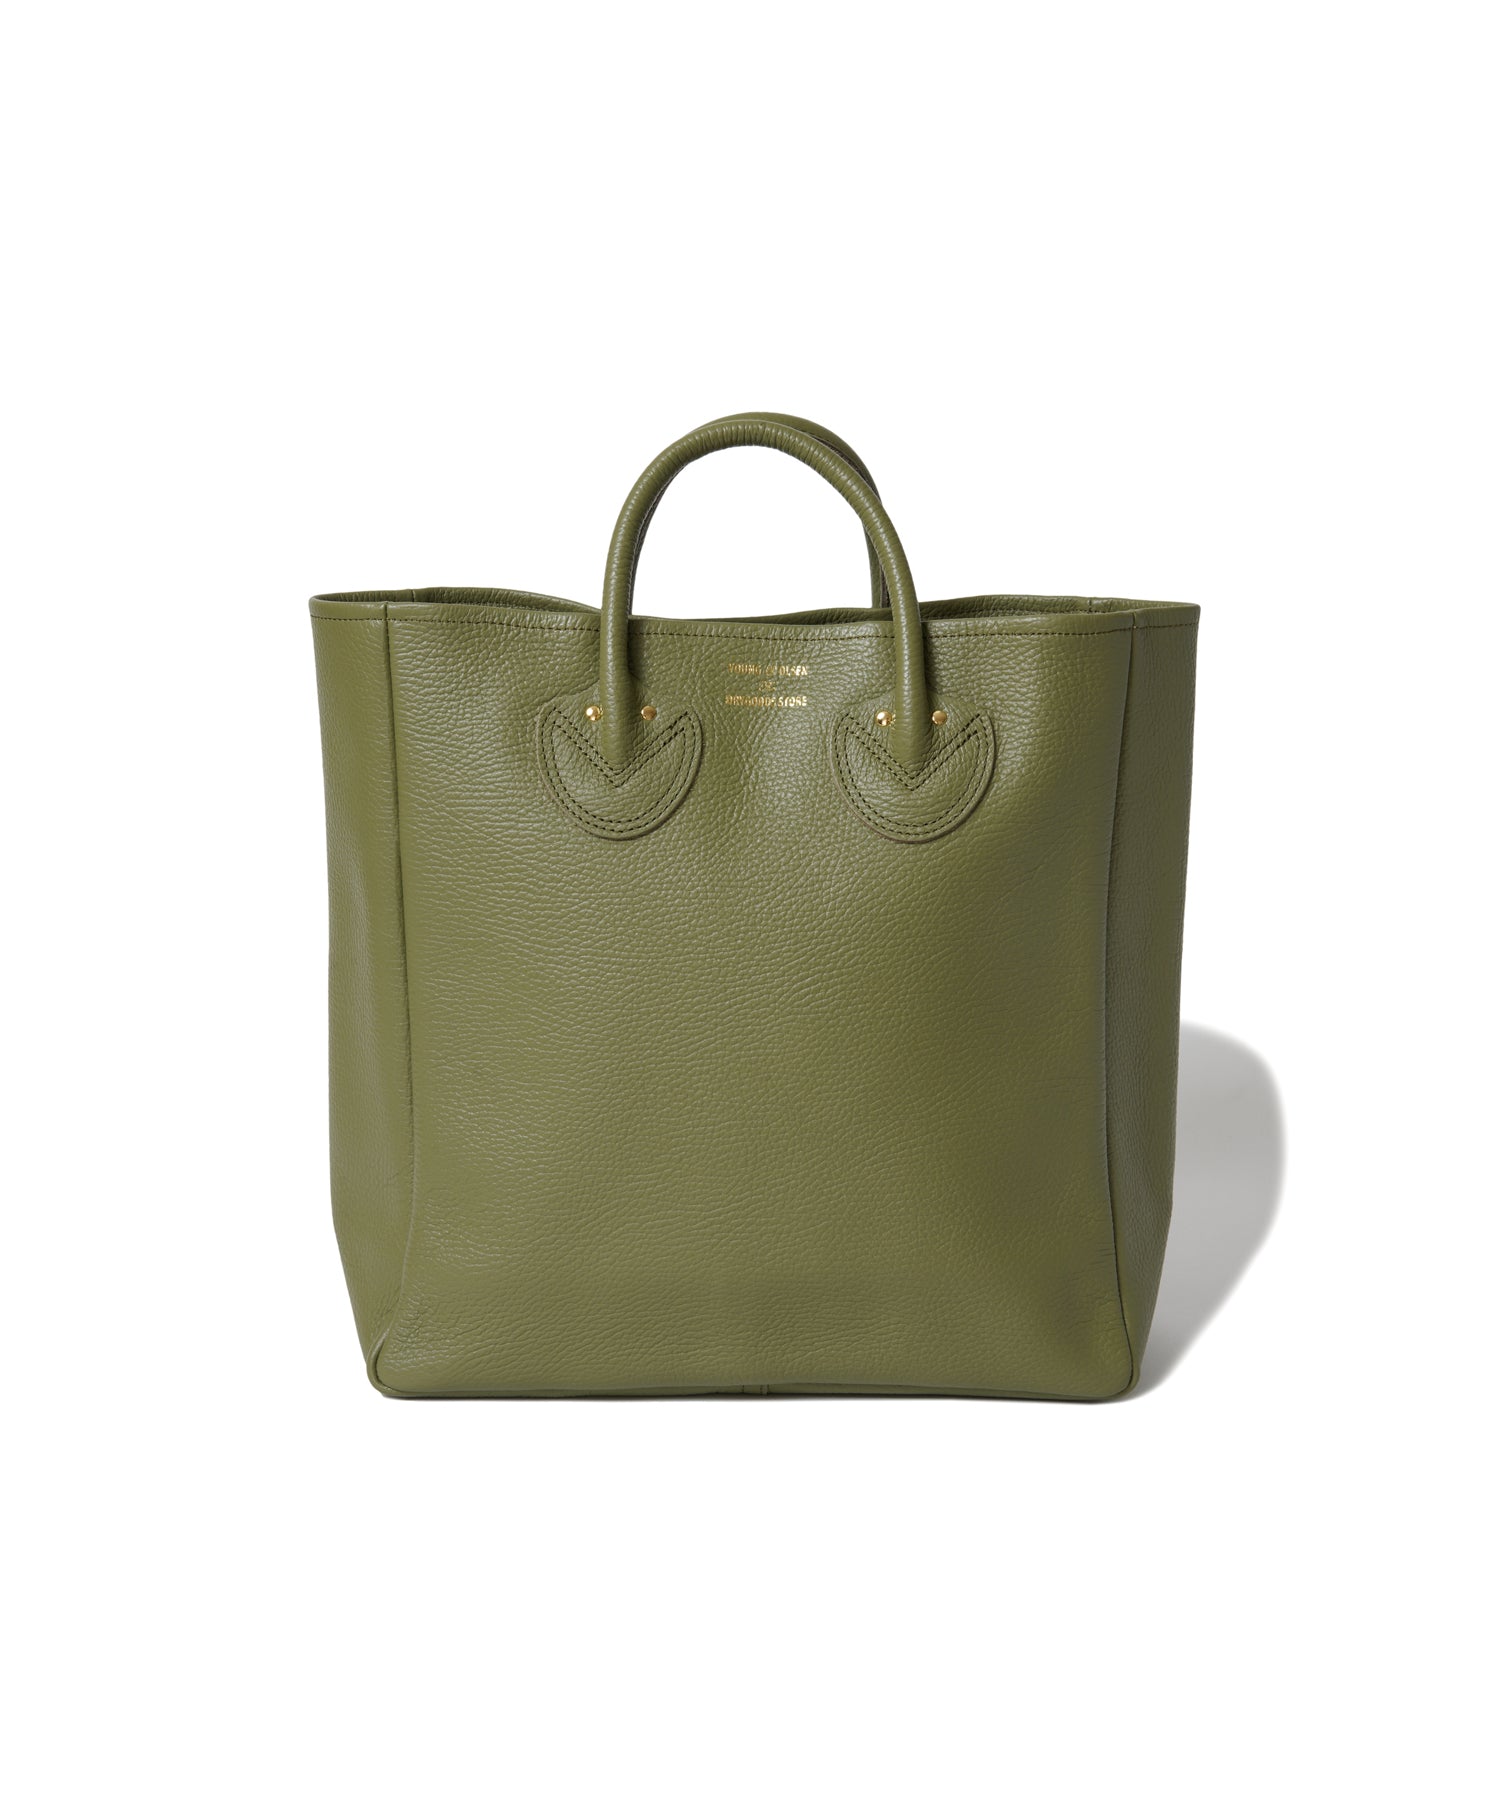 【WOMEN】YOUNG u0026 OLSEN TDS Embossed Leather TOTE M ライトオリーブ / Free